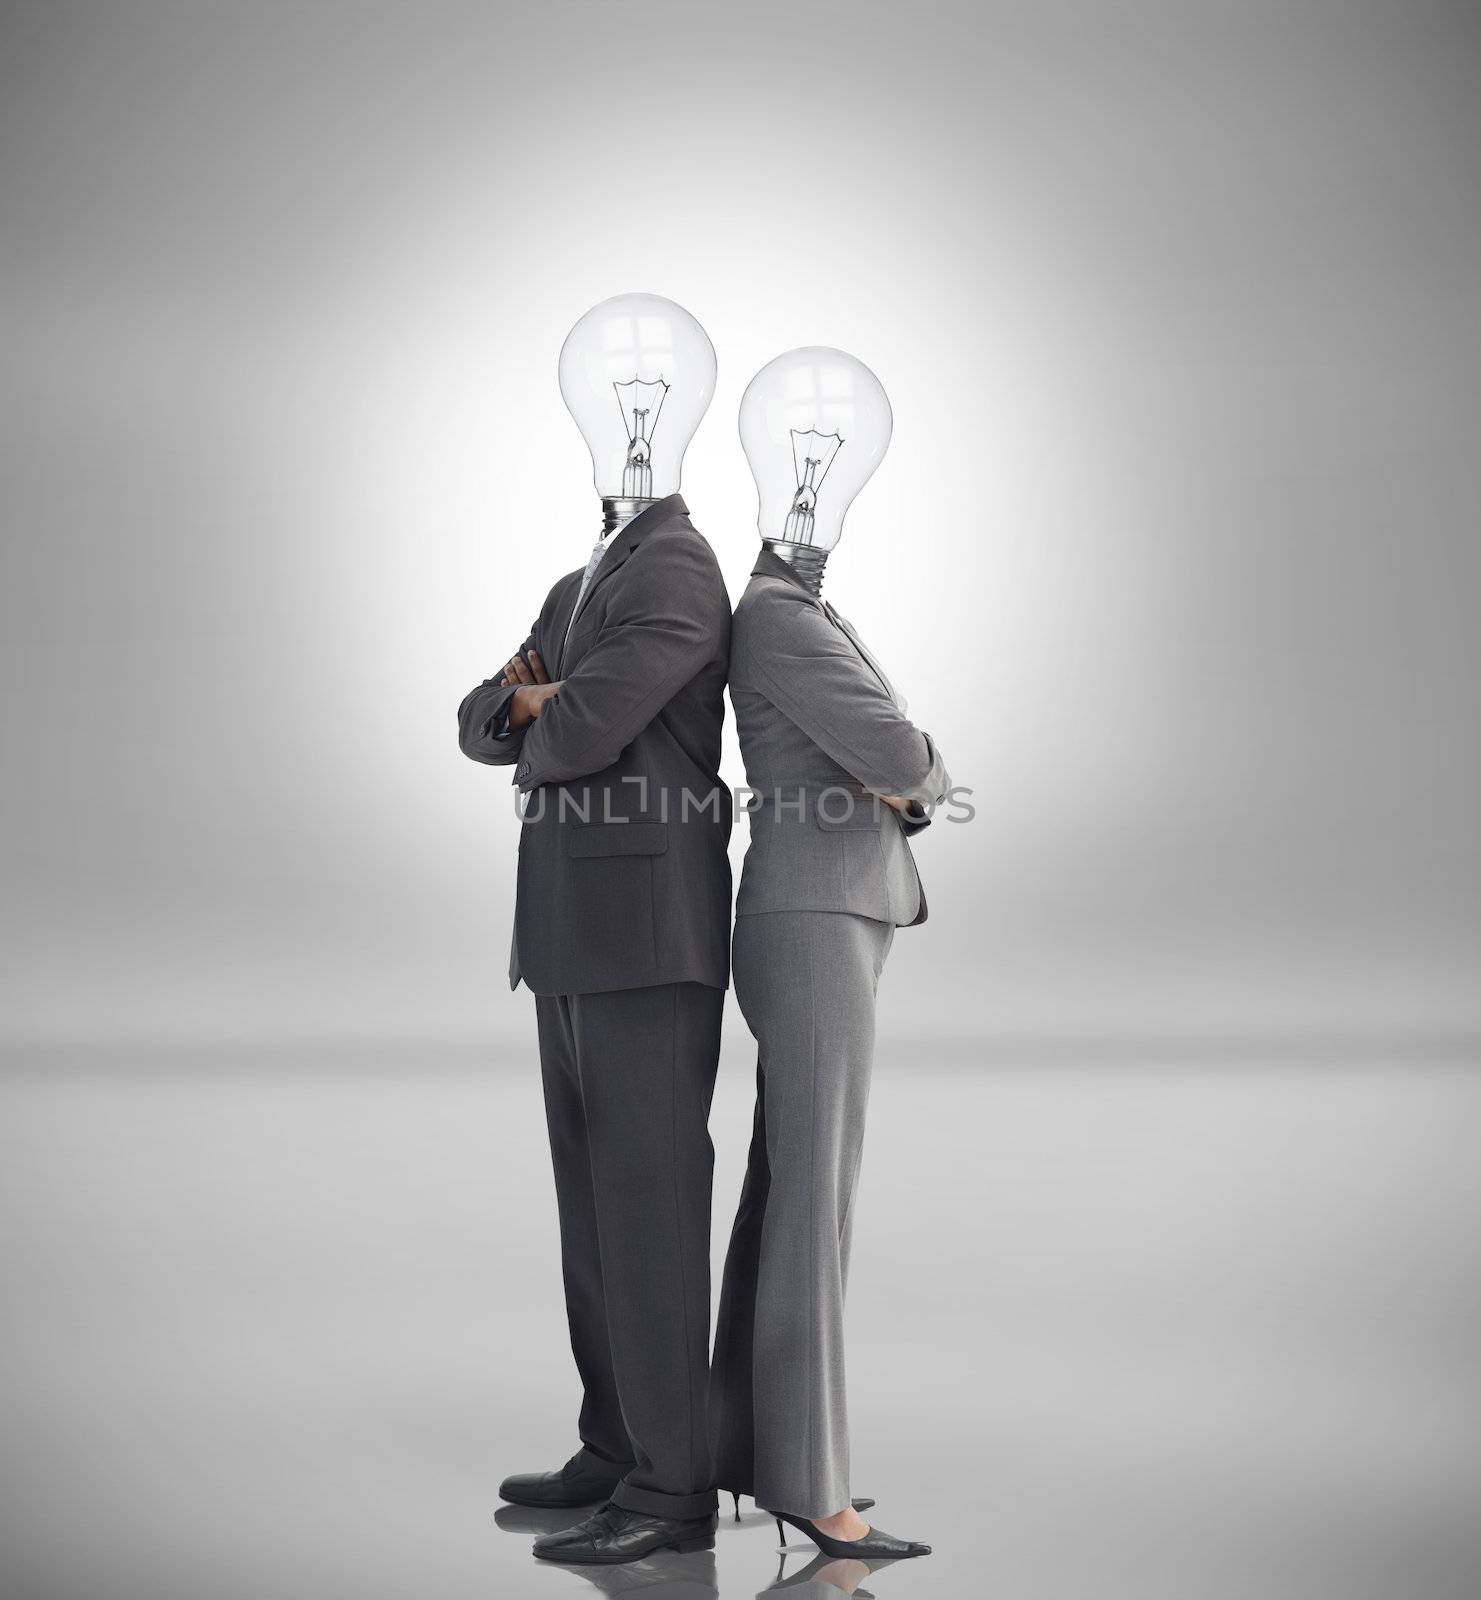 Business people with light bulbs instead of heads standing back to back